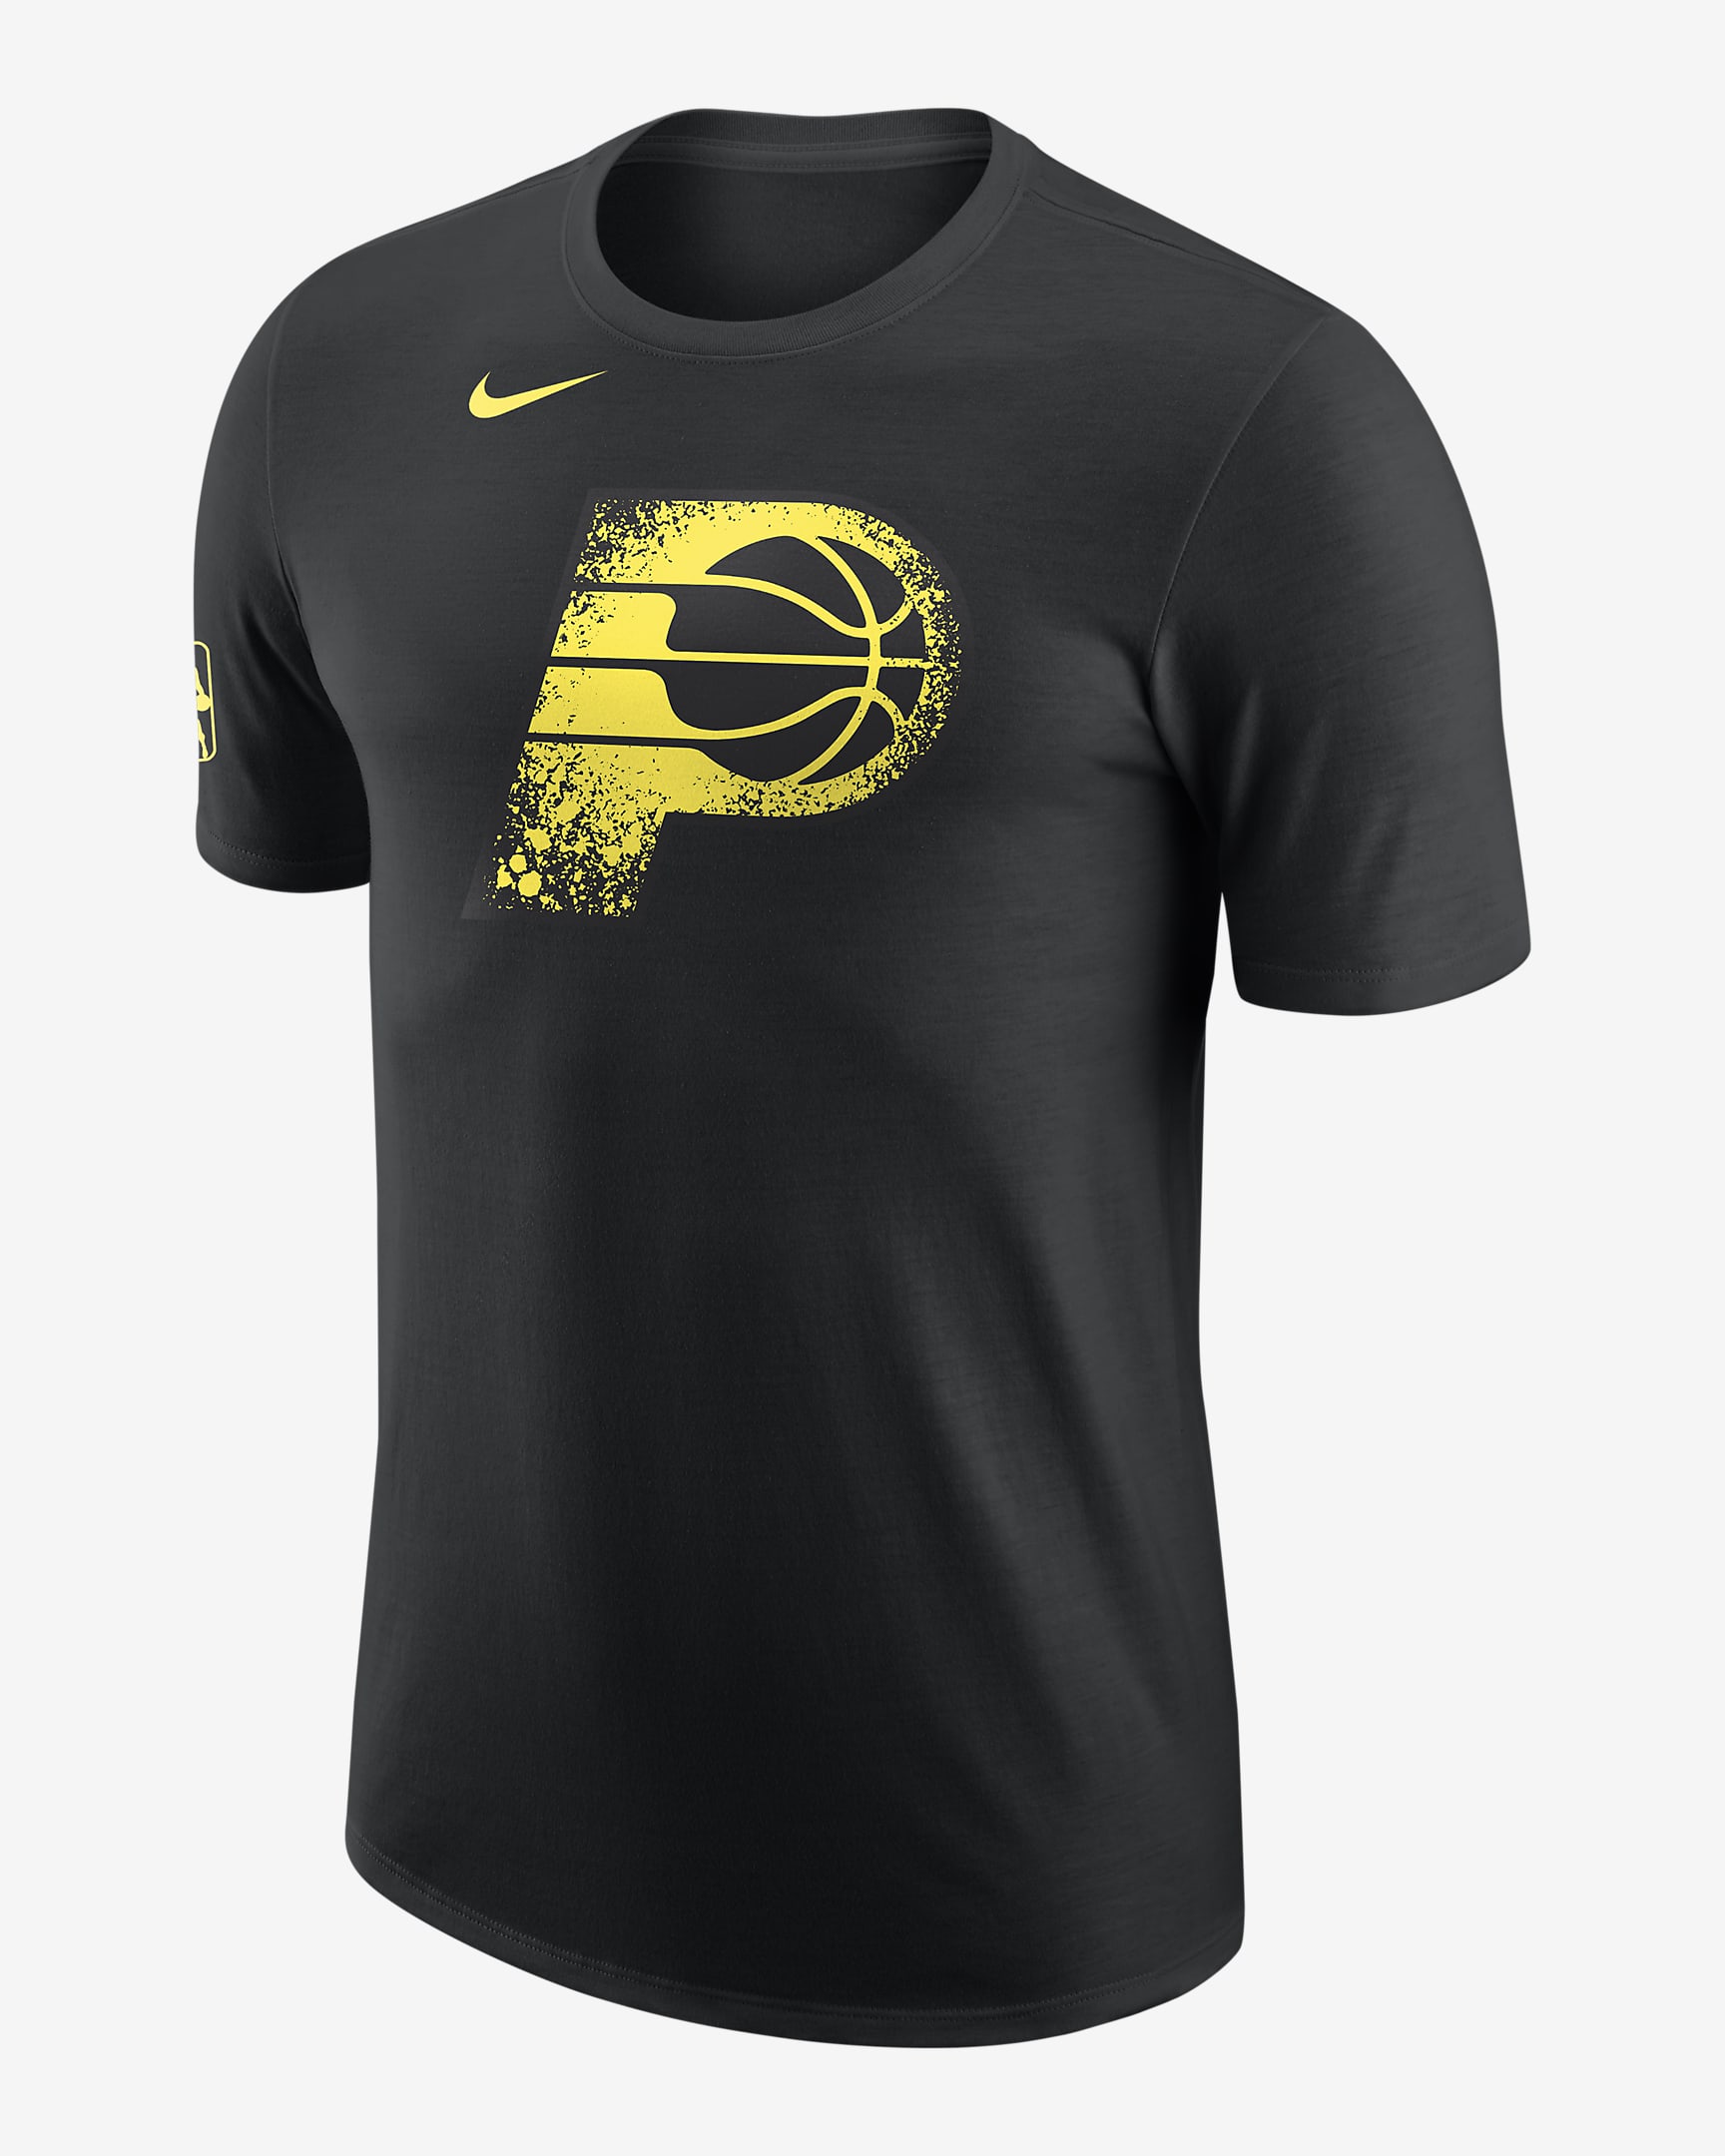 Indiana Pacers City Edition Men's Nike NBA T-Shirt. Nike HR